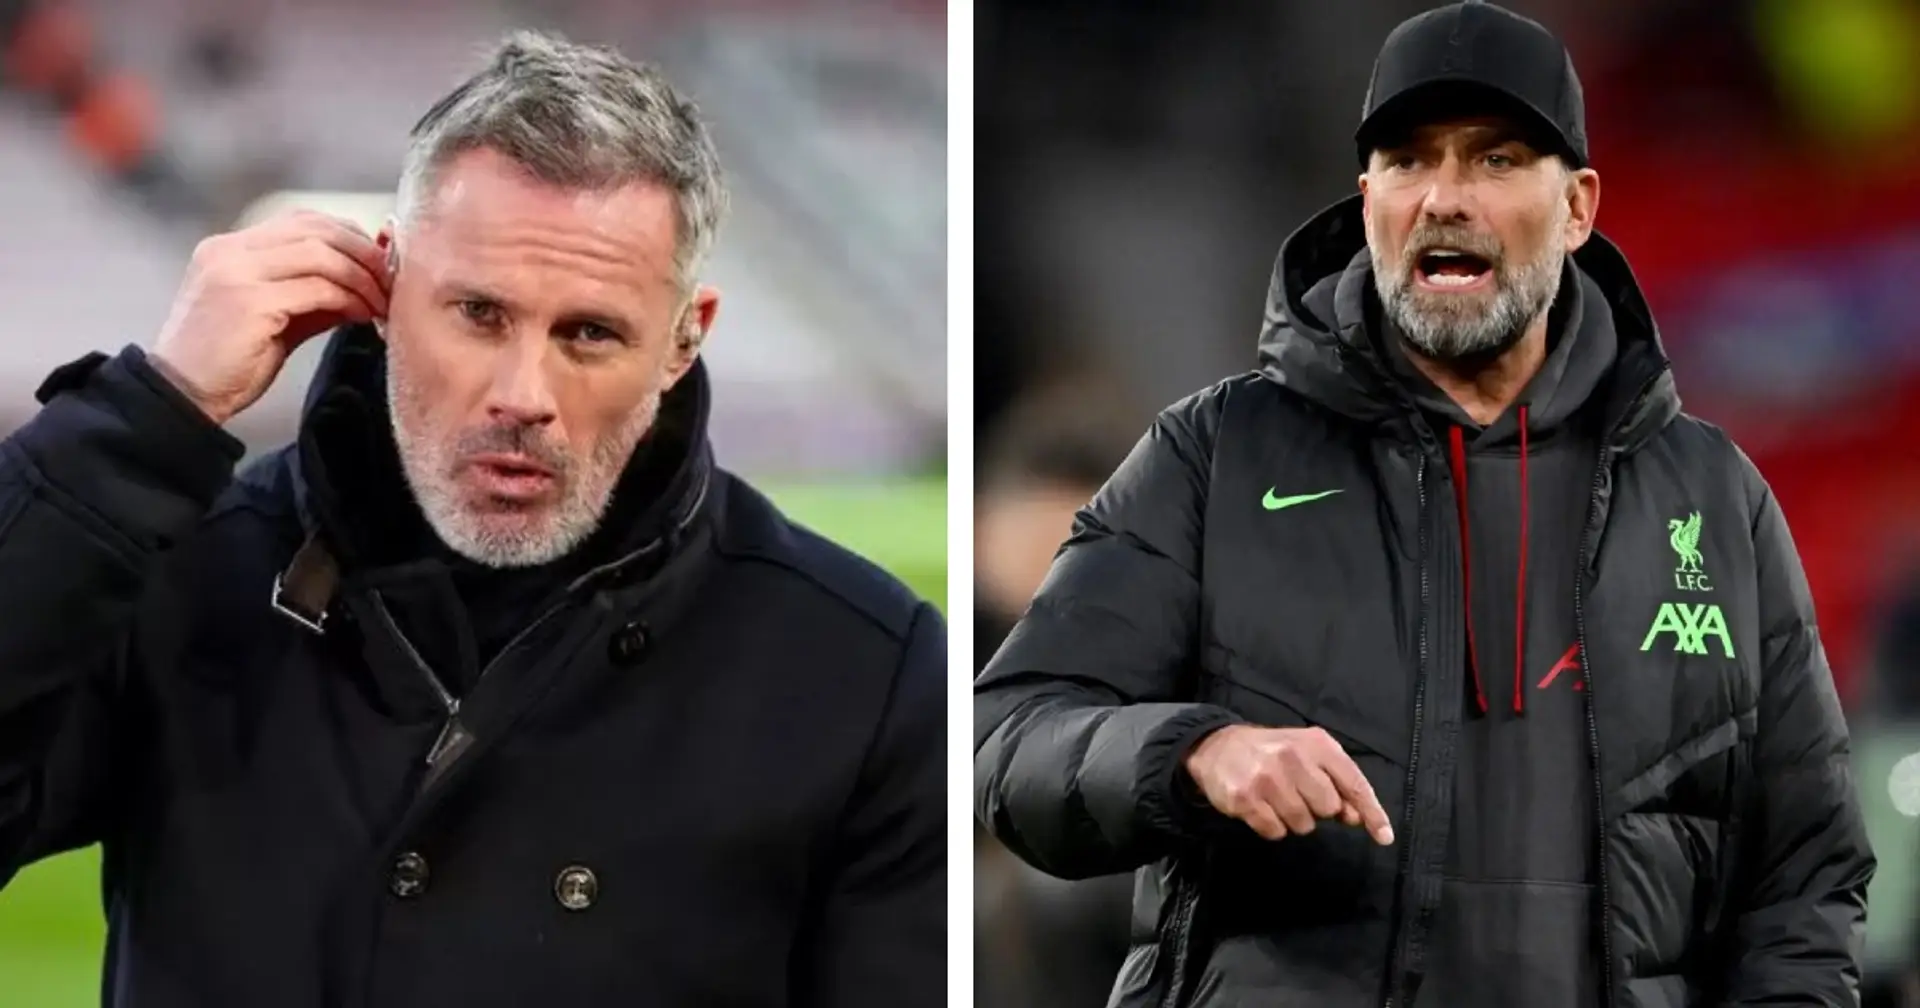 'We've been sh*te for weeks': Fans react as Carragher tells Liverpool to give up on Europa League to focus on PL title